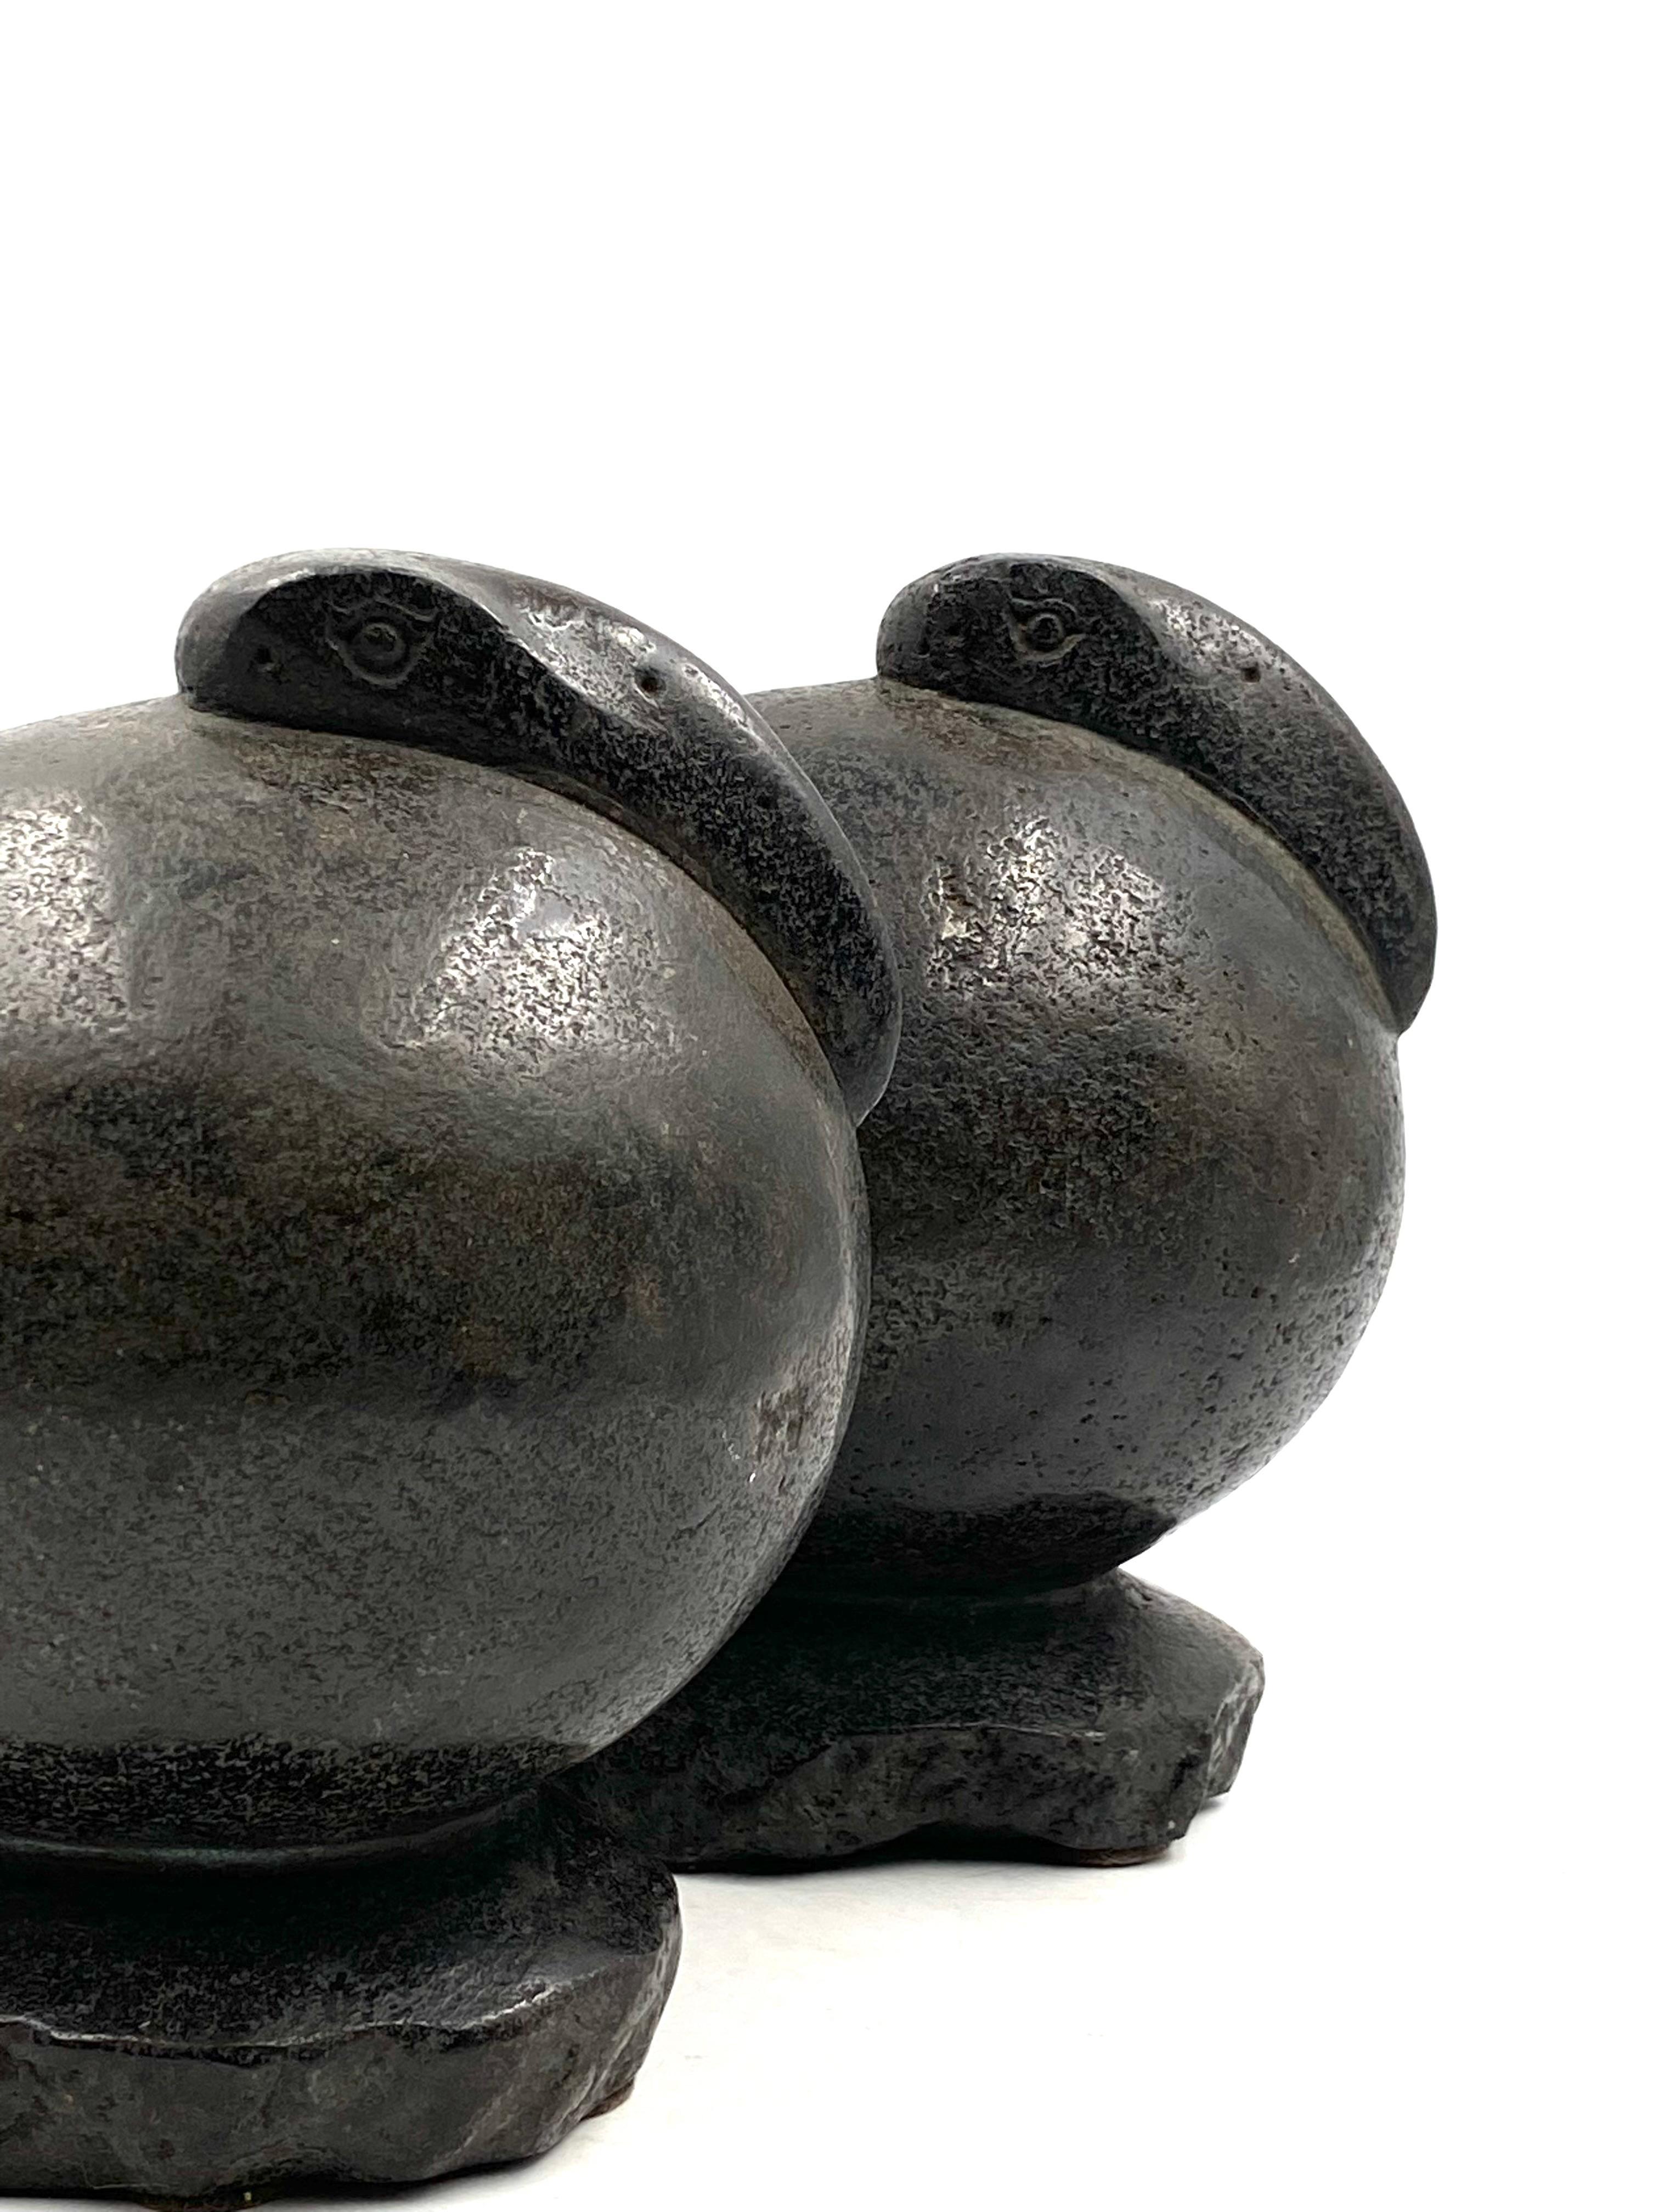 Ibis Birds, Pair of Basalt Ovoid Sculptures, France Early 20th Century 11